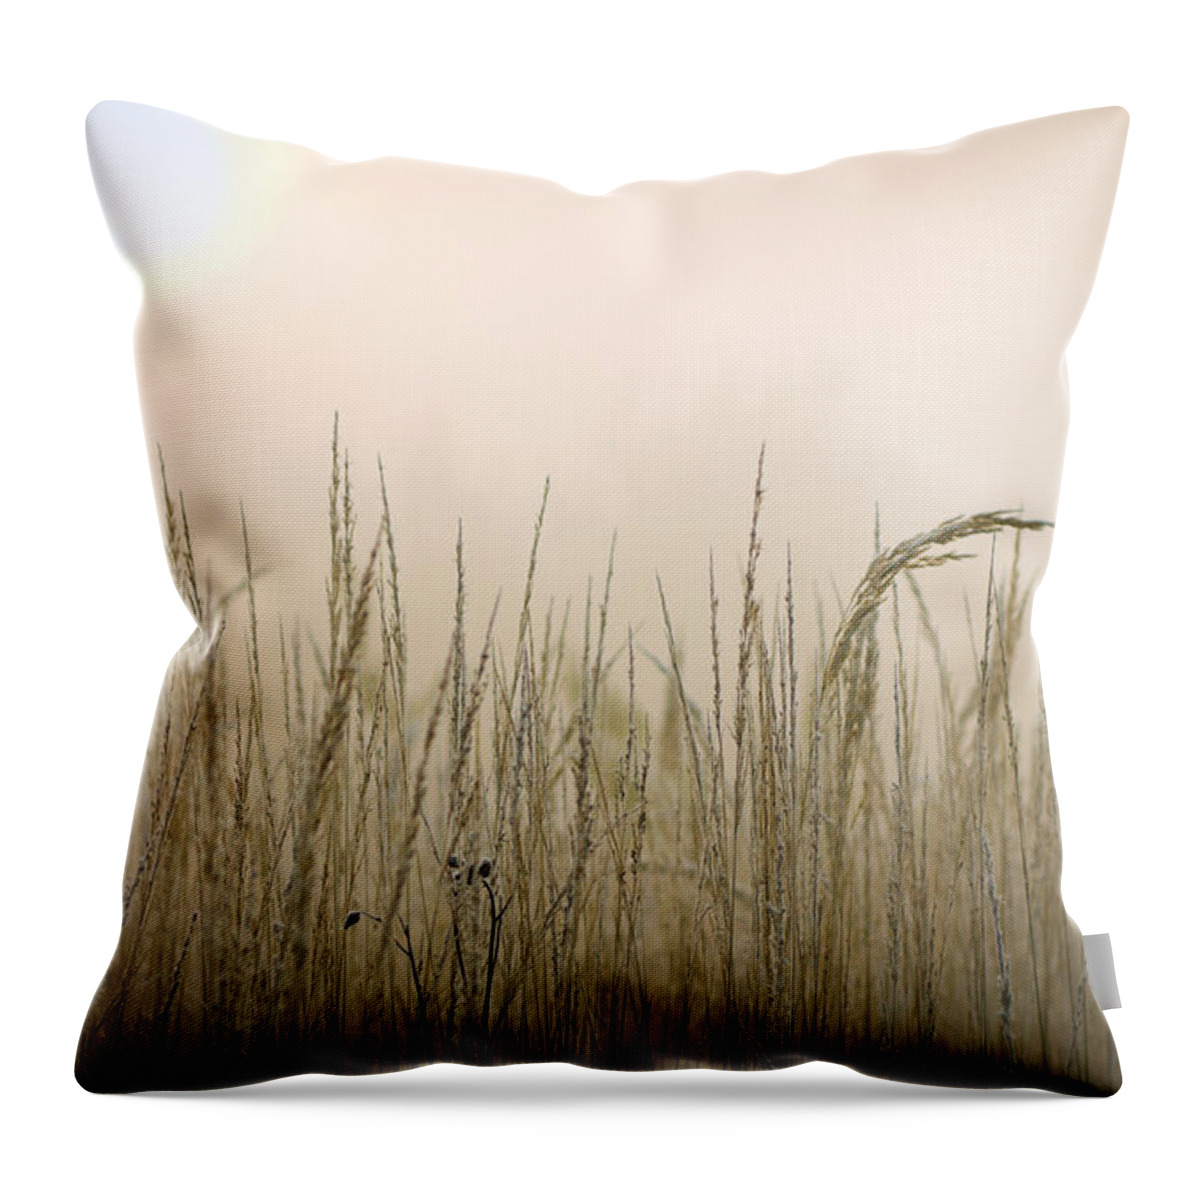 Scenics Throw Pillow featuring the photograph Frozen Grass At Hazy Morning by Alexkotlov